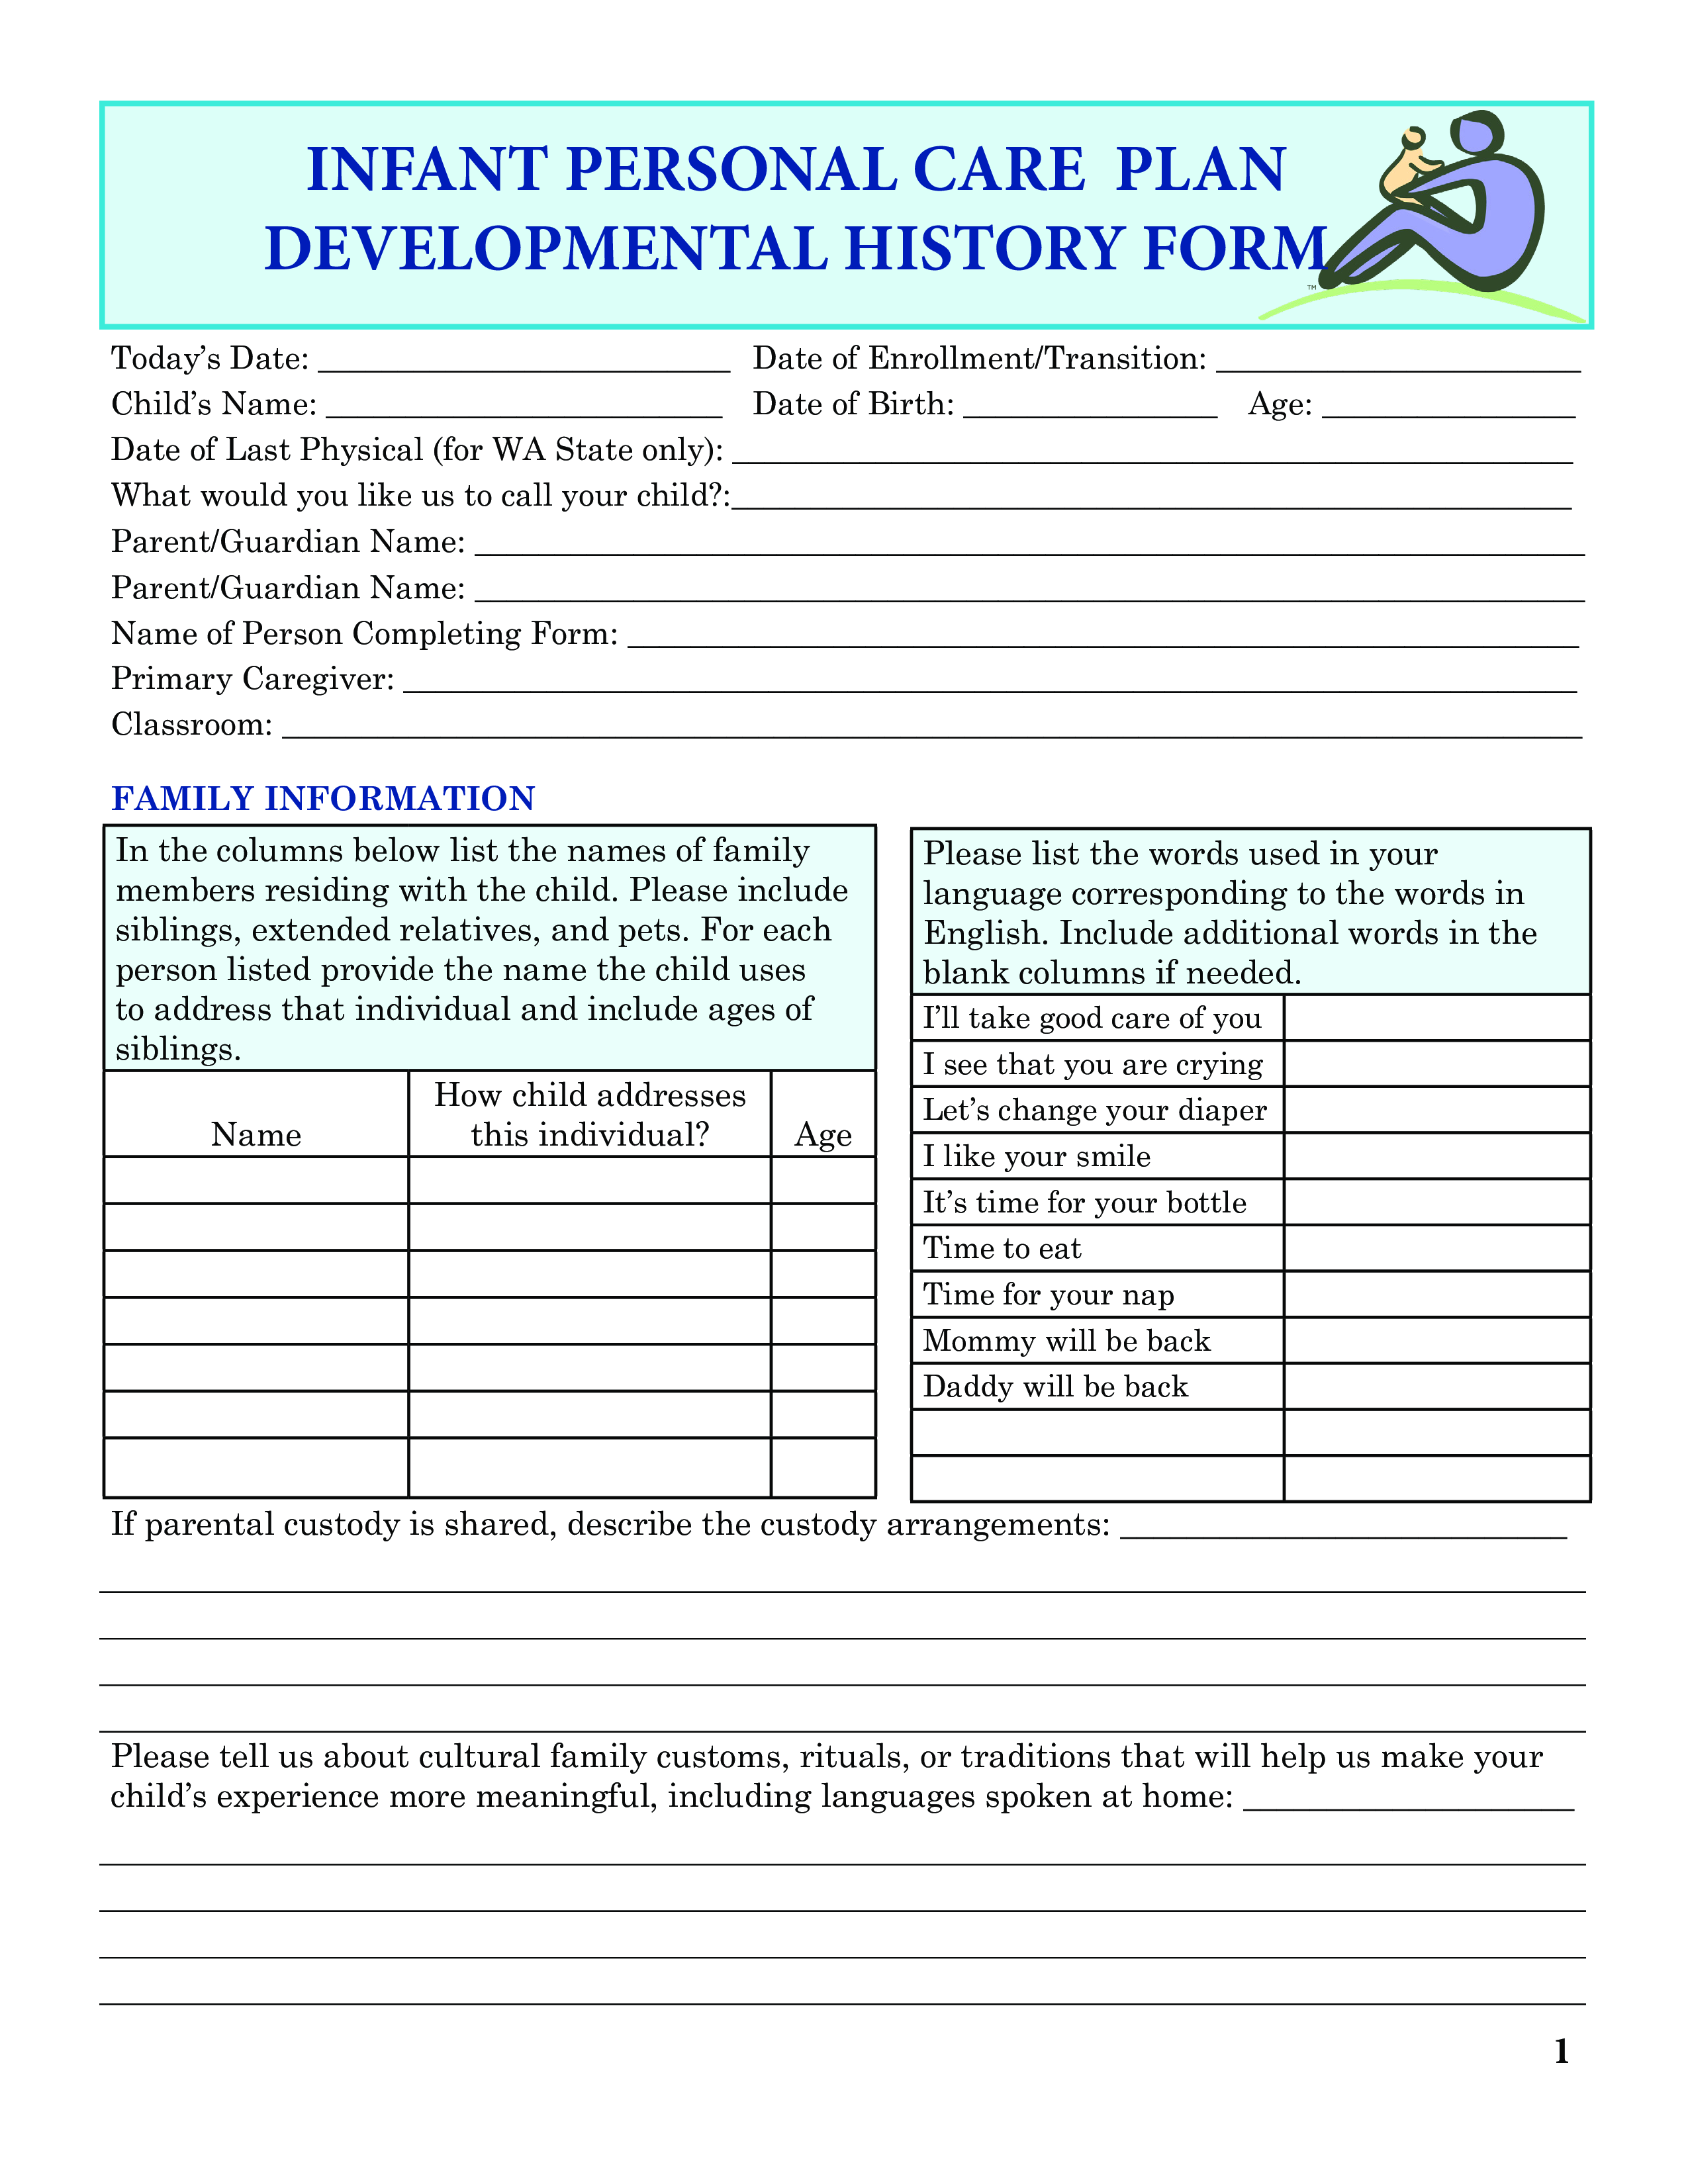 infant personal care plan template